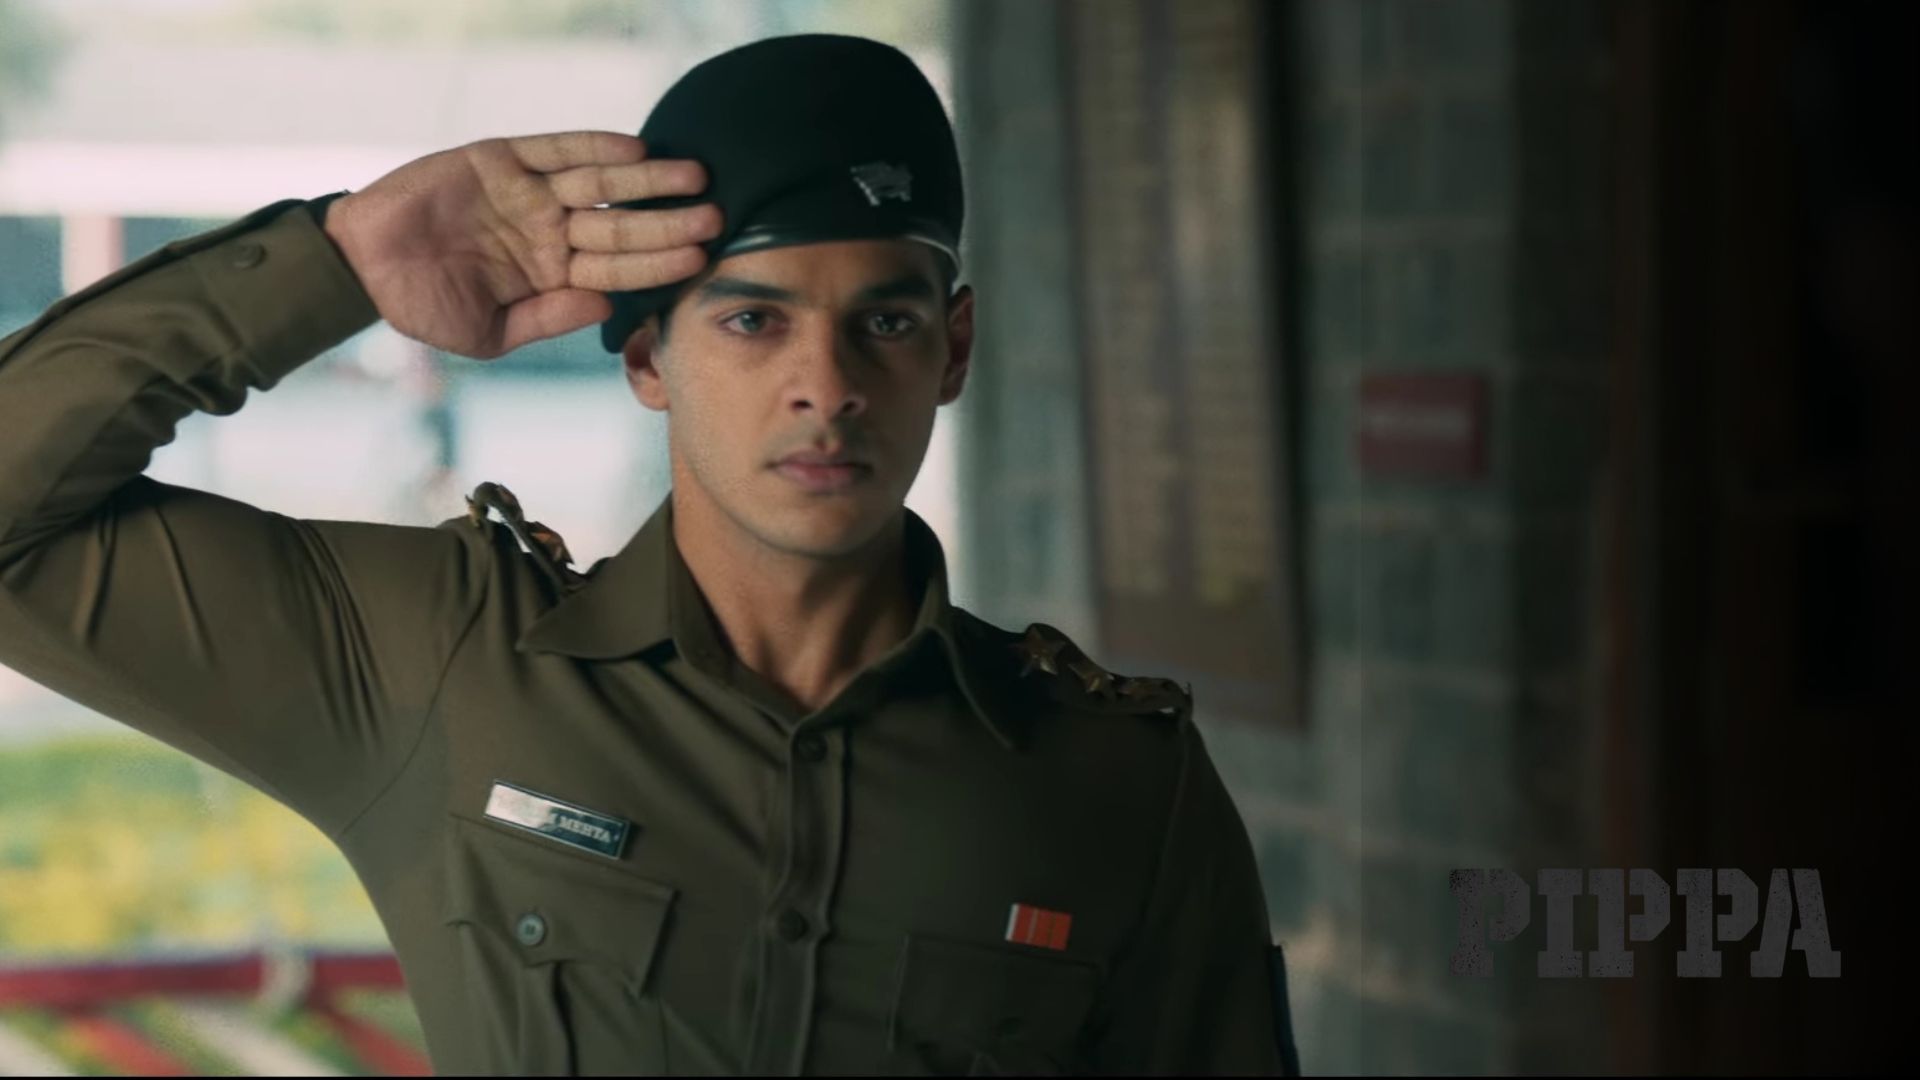 Pippa trailer out, shows a glimpse of 1971 Indo-Pak war